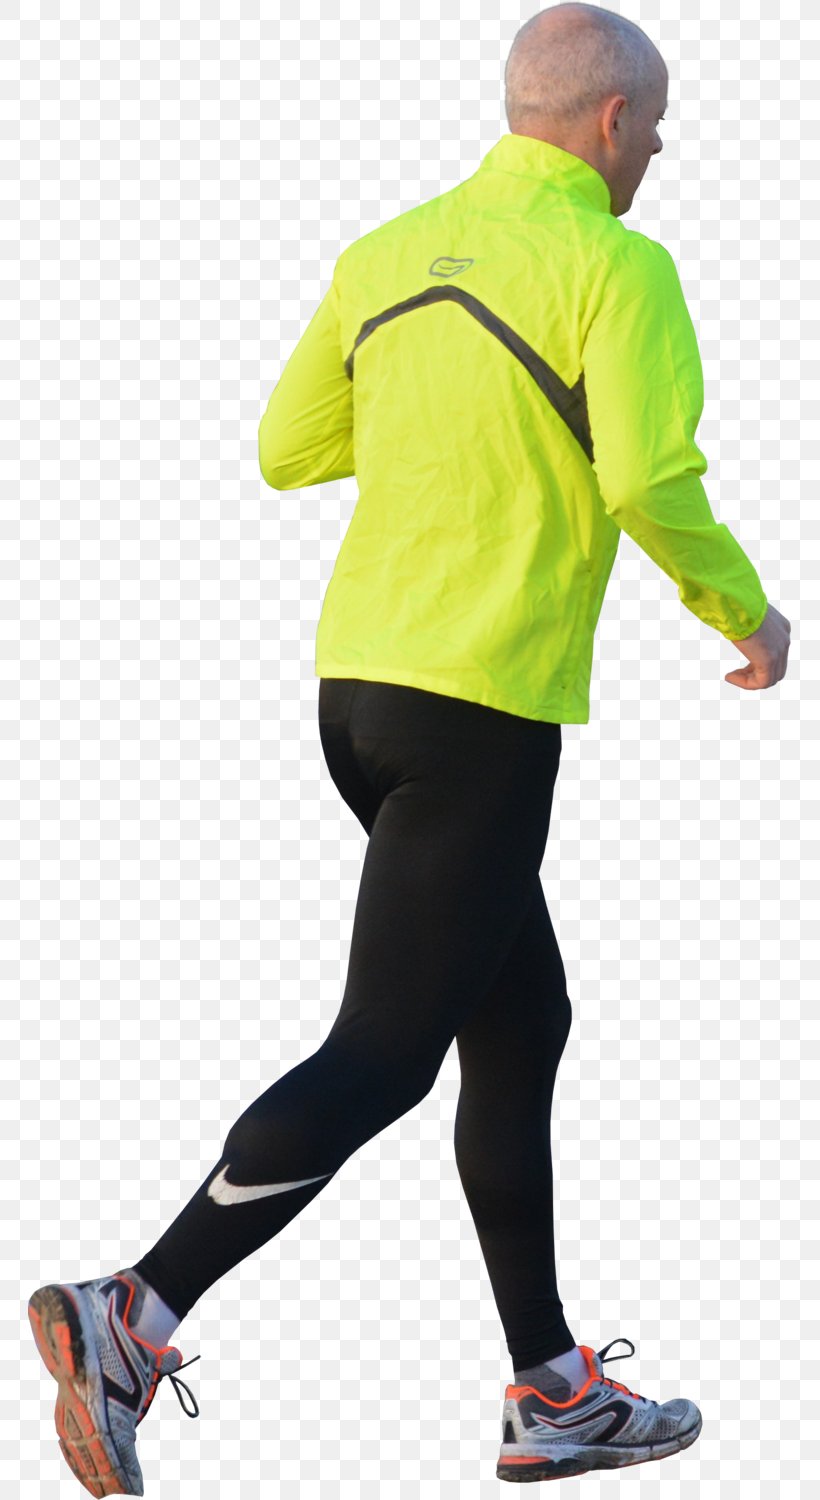 Jogging Running Sport Clip Art, PNG, 763x1500px, Jogging, Arm, Child, Footwear, Joint Download Free